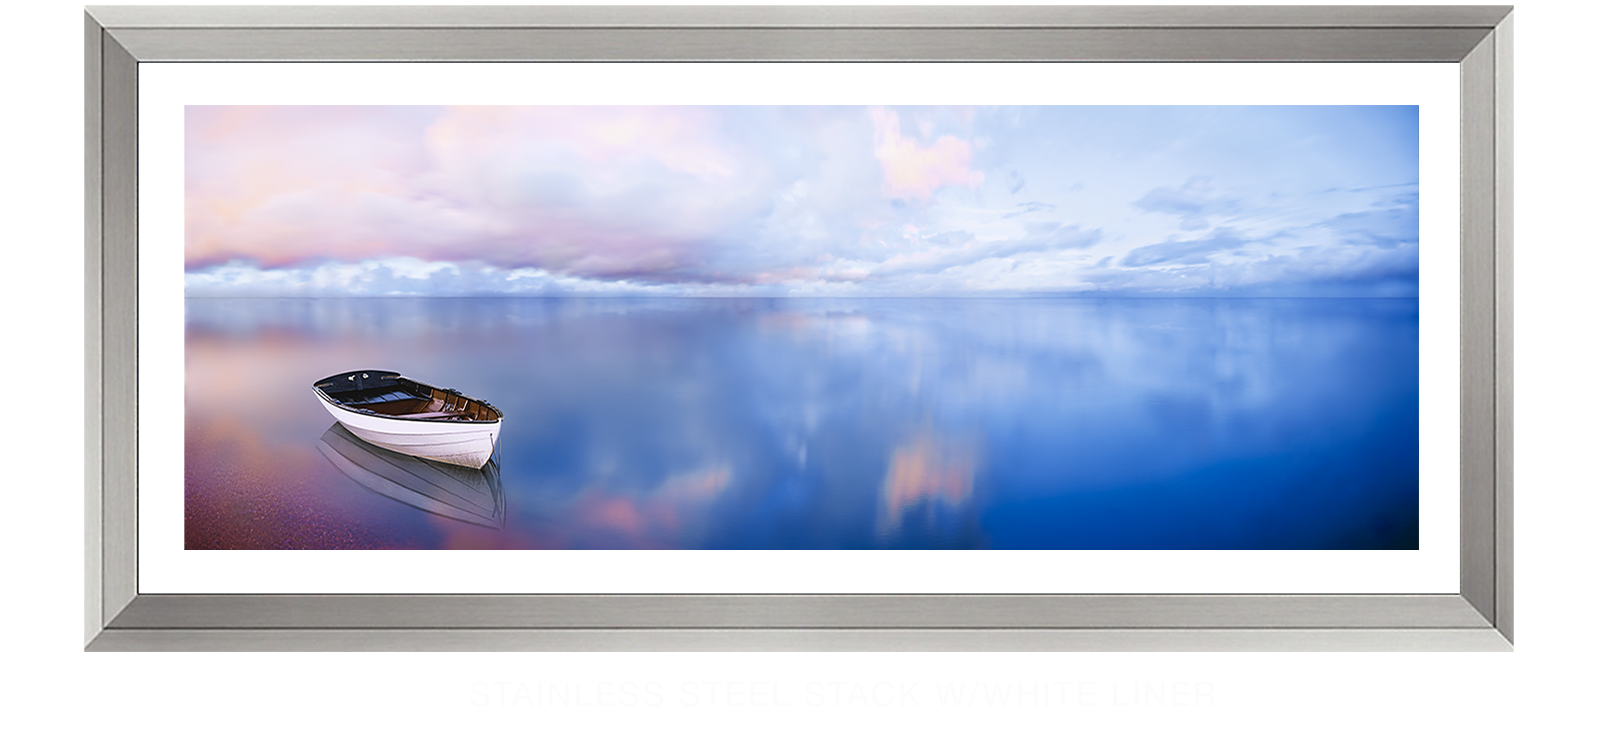 6BLUELAKEBOAT Stainless Steel Stack w_Wht Liner T